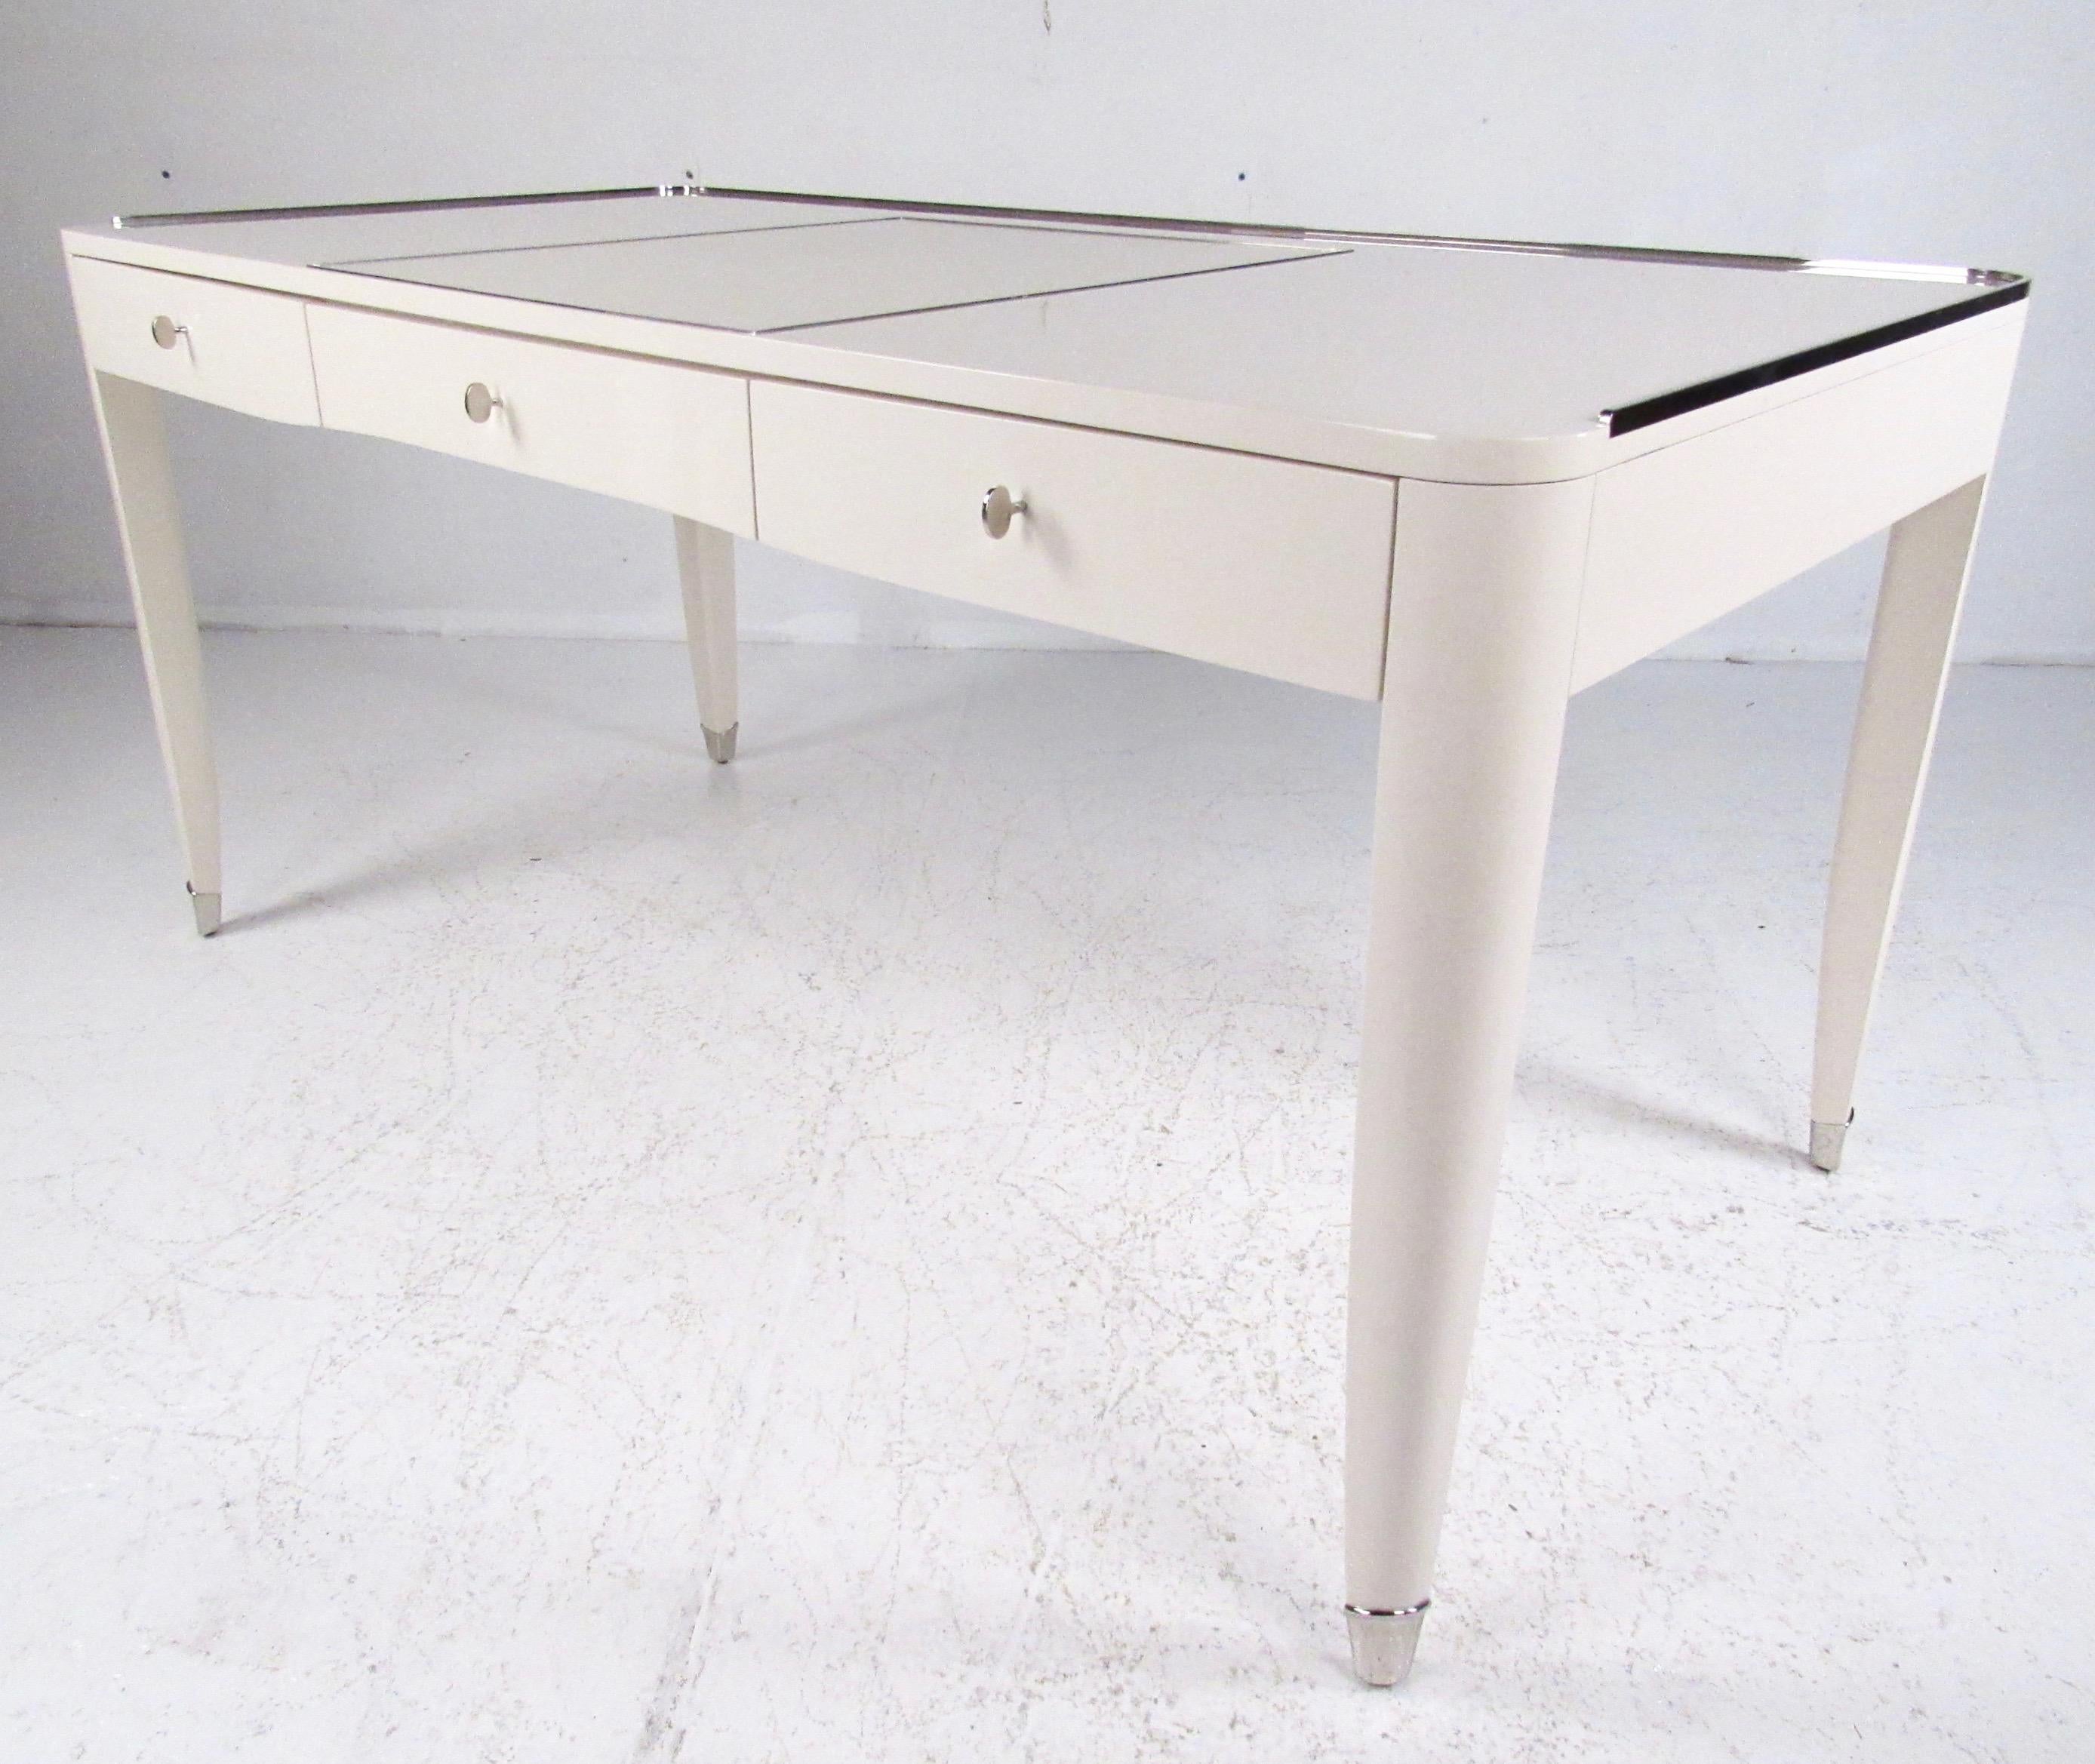 The Ralph Lauren One Fifths Paris desk offers spacious writing surface and three drawers for office storage. This beautiful modern desk features parchment coloring, polished nickel trim, and elegant 1920s style French design. Please confirm item